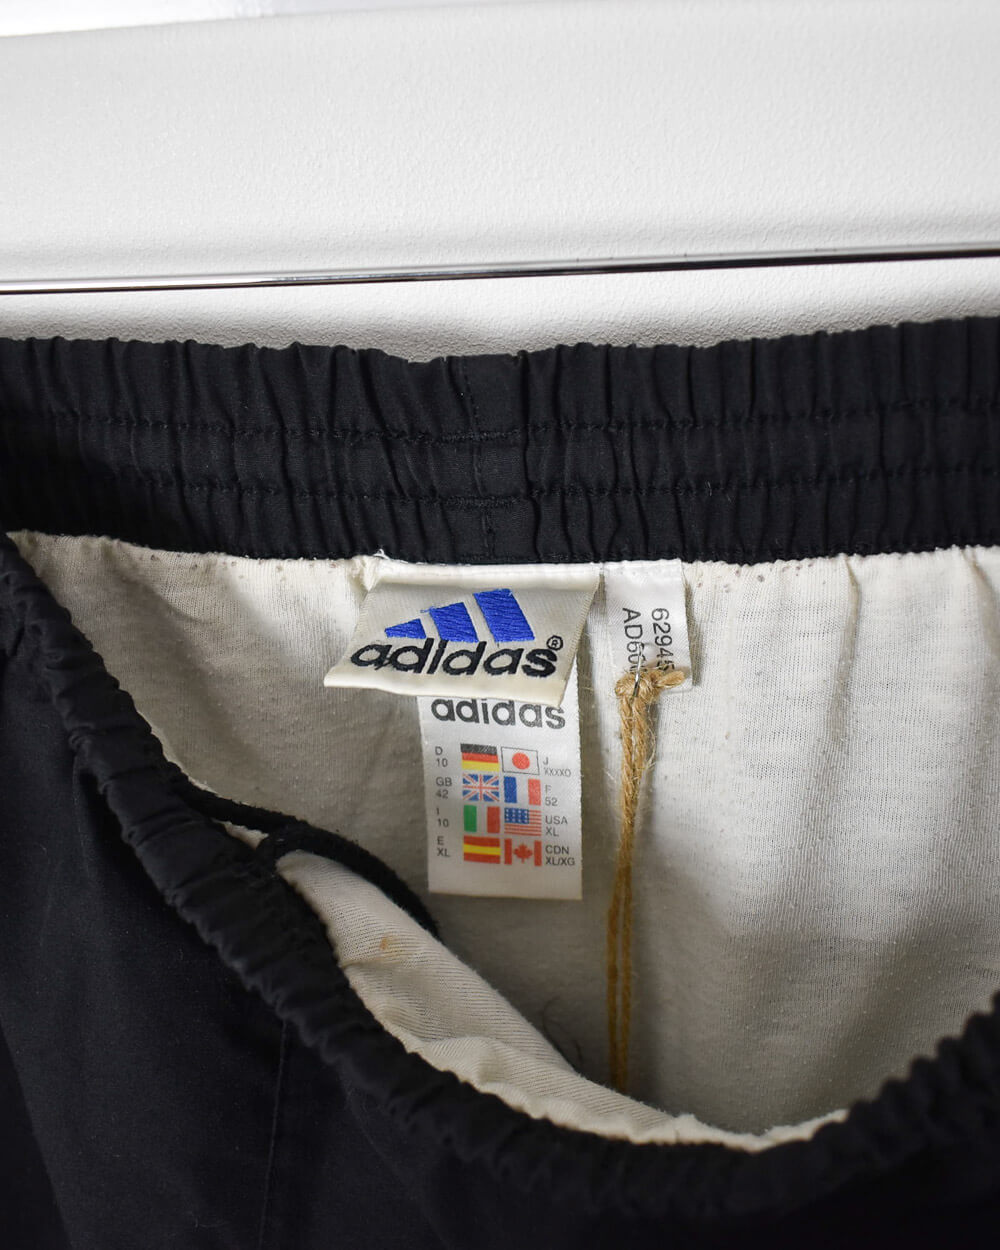 Adidas Shorts - W38 L17 - Domno Vintage 90s, 80s, 00s Retro and Vintage Clothing 